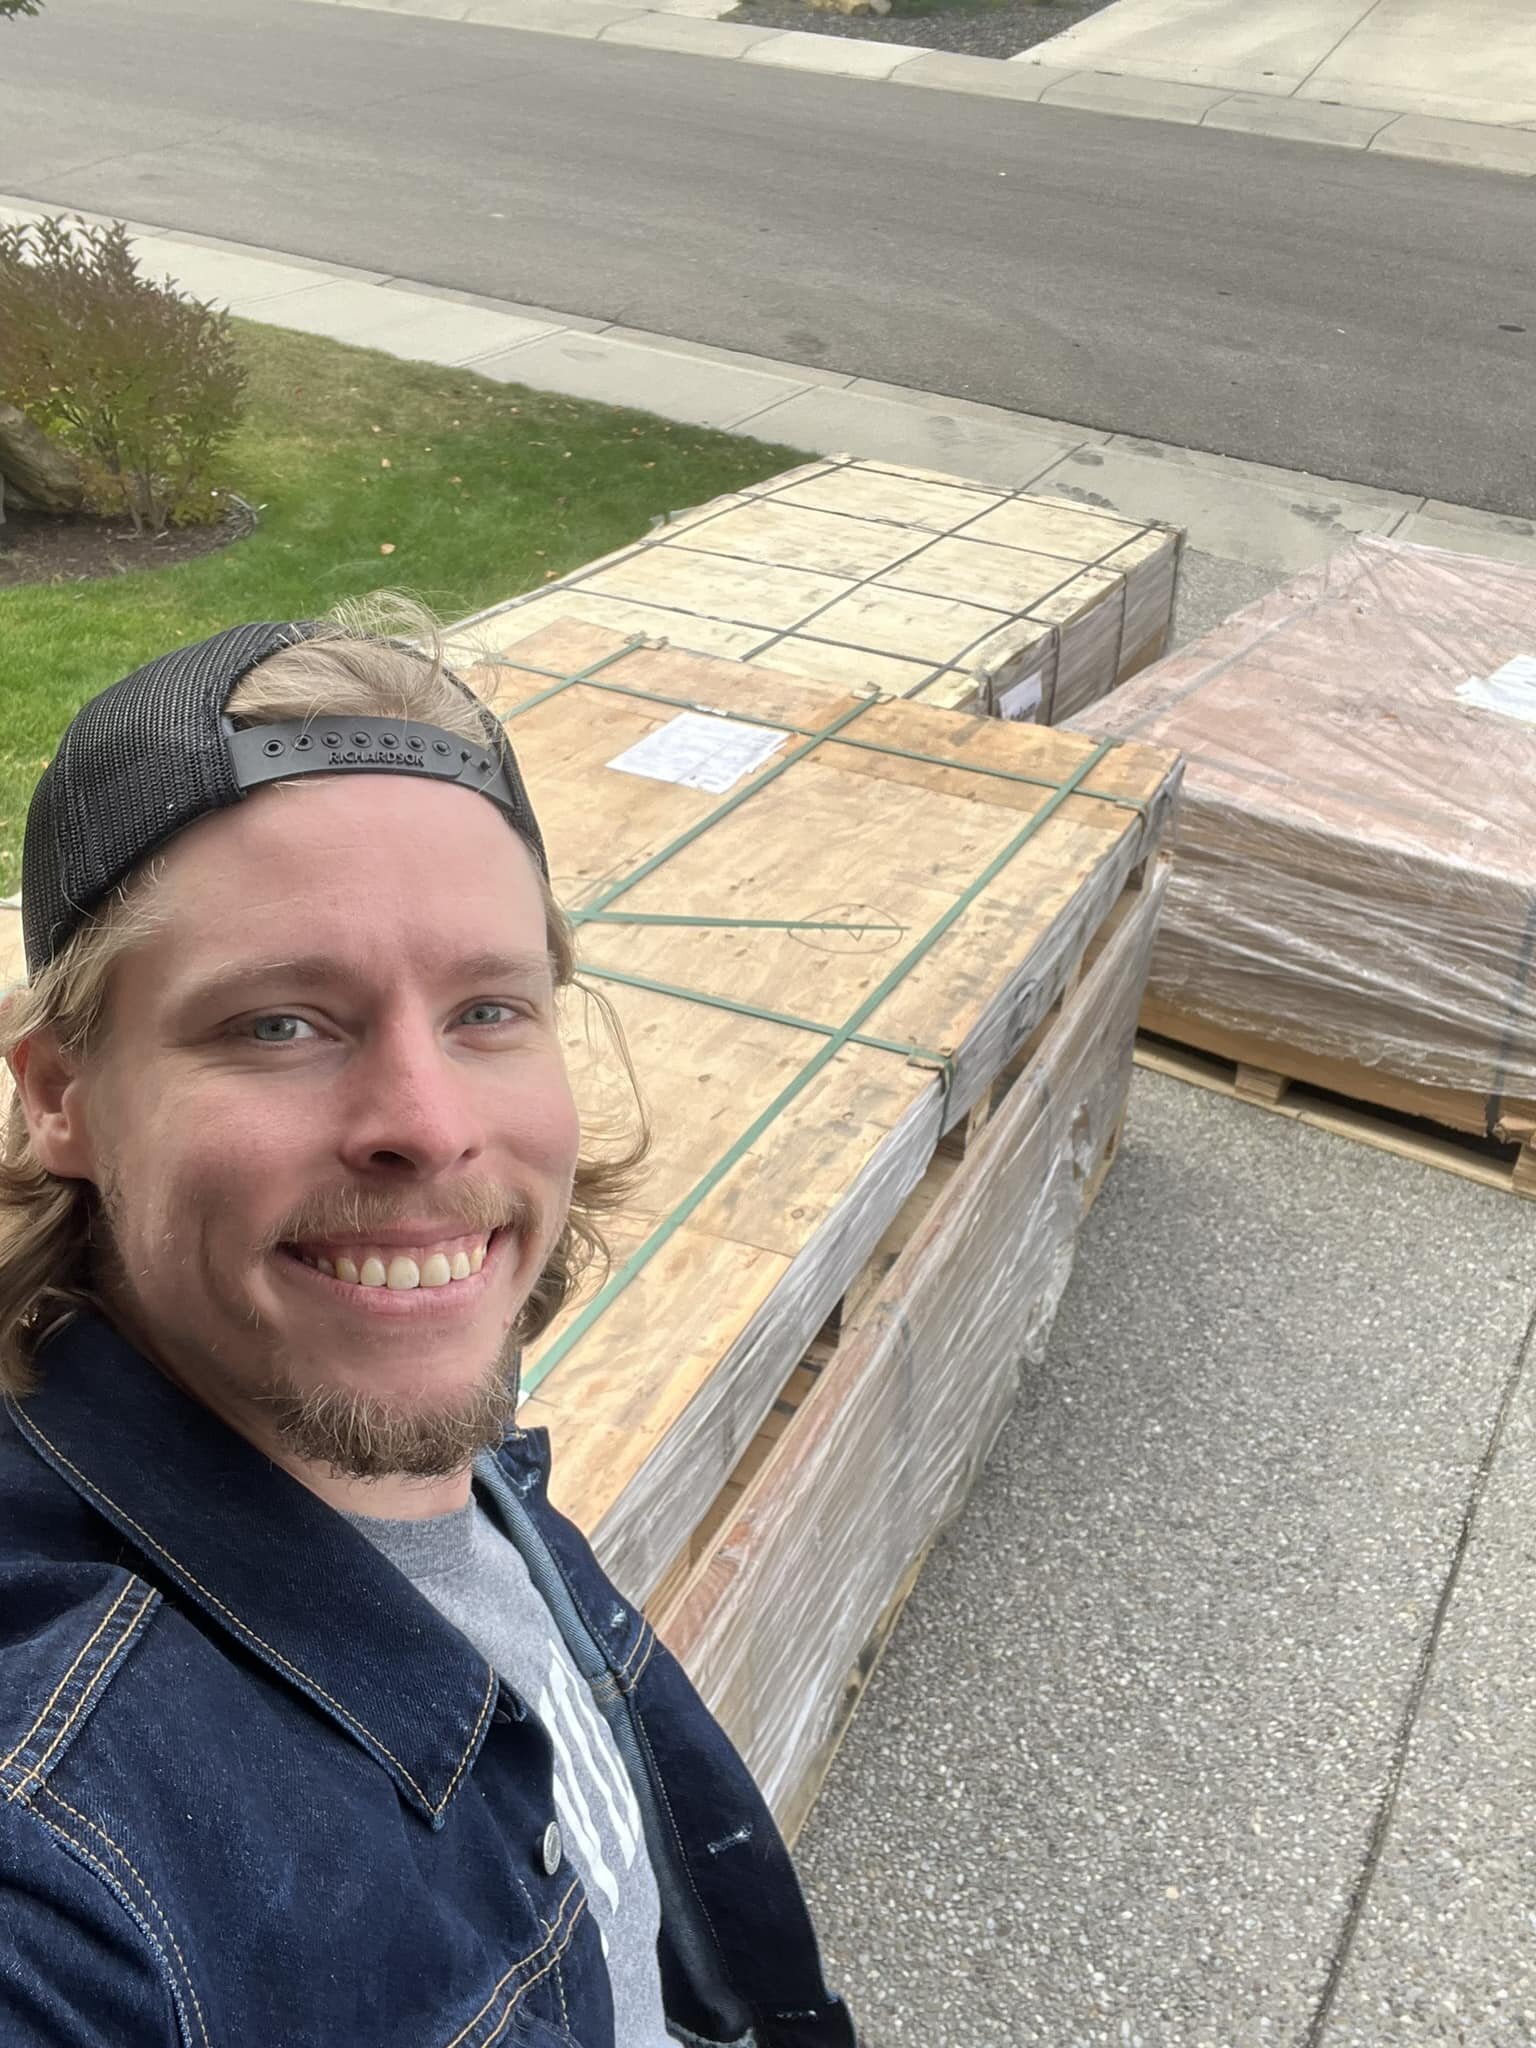 It&rsquo;s always exciting when packages show up on your driveway. Our order of laser-ready low-odor acrylic sheets arrived in immaculate condition. Let the laser cutting commence 🙌.